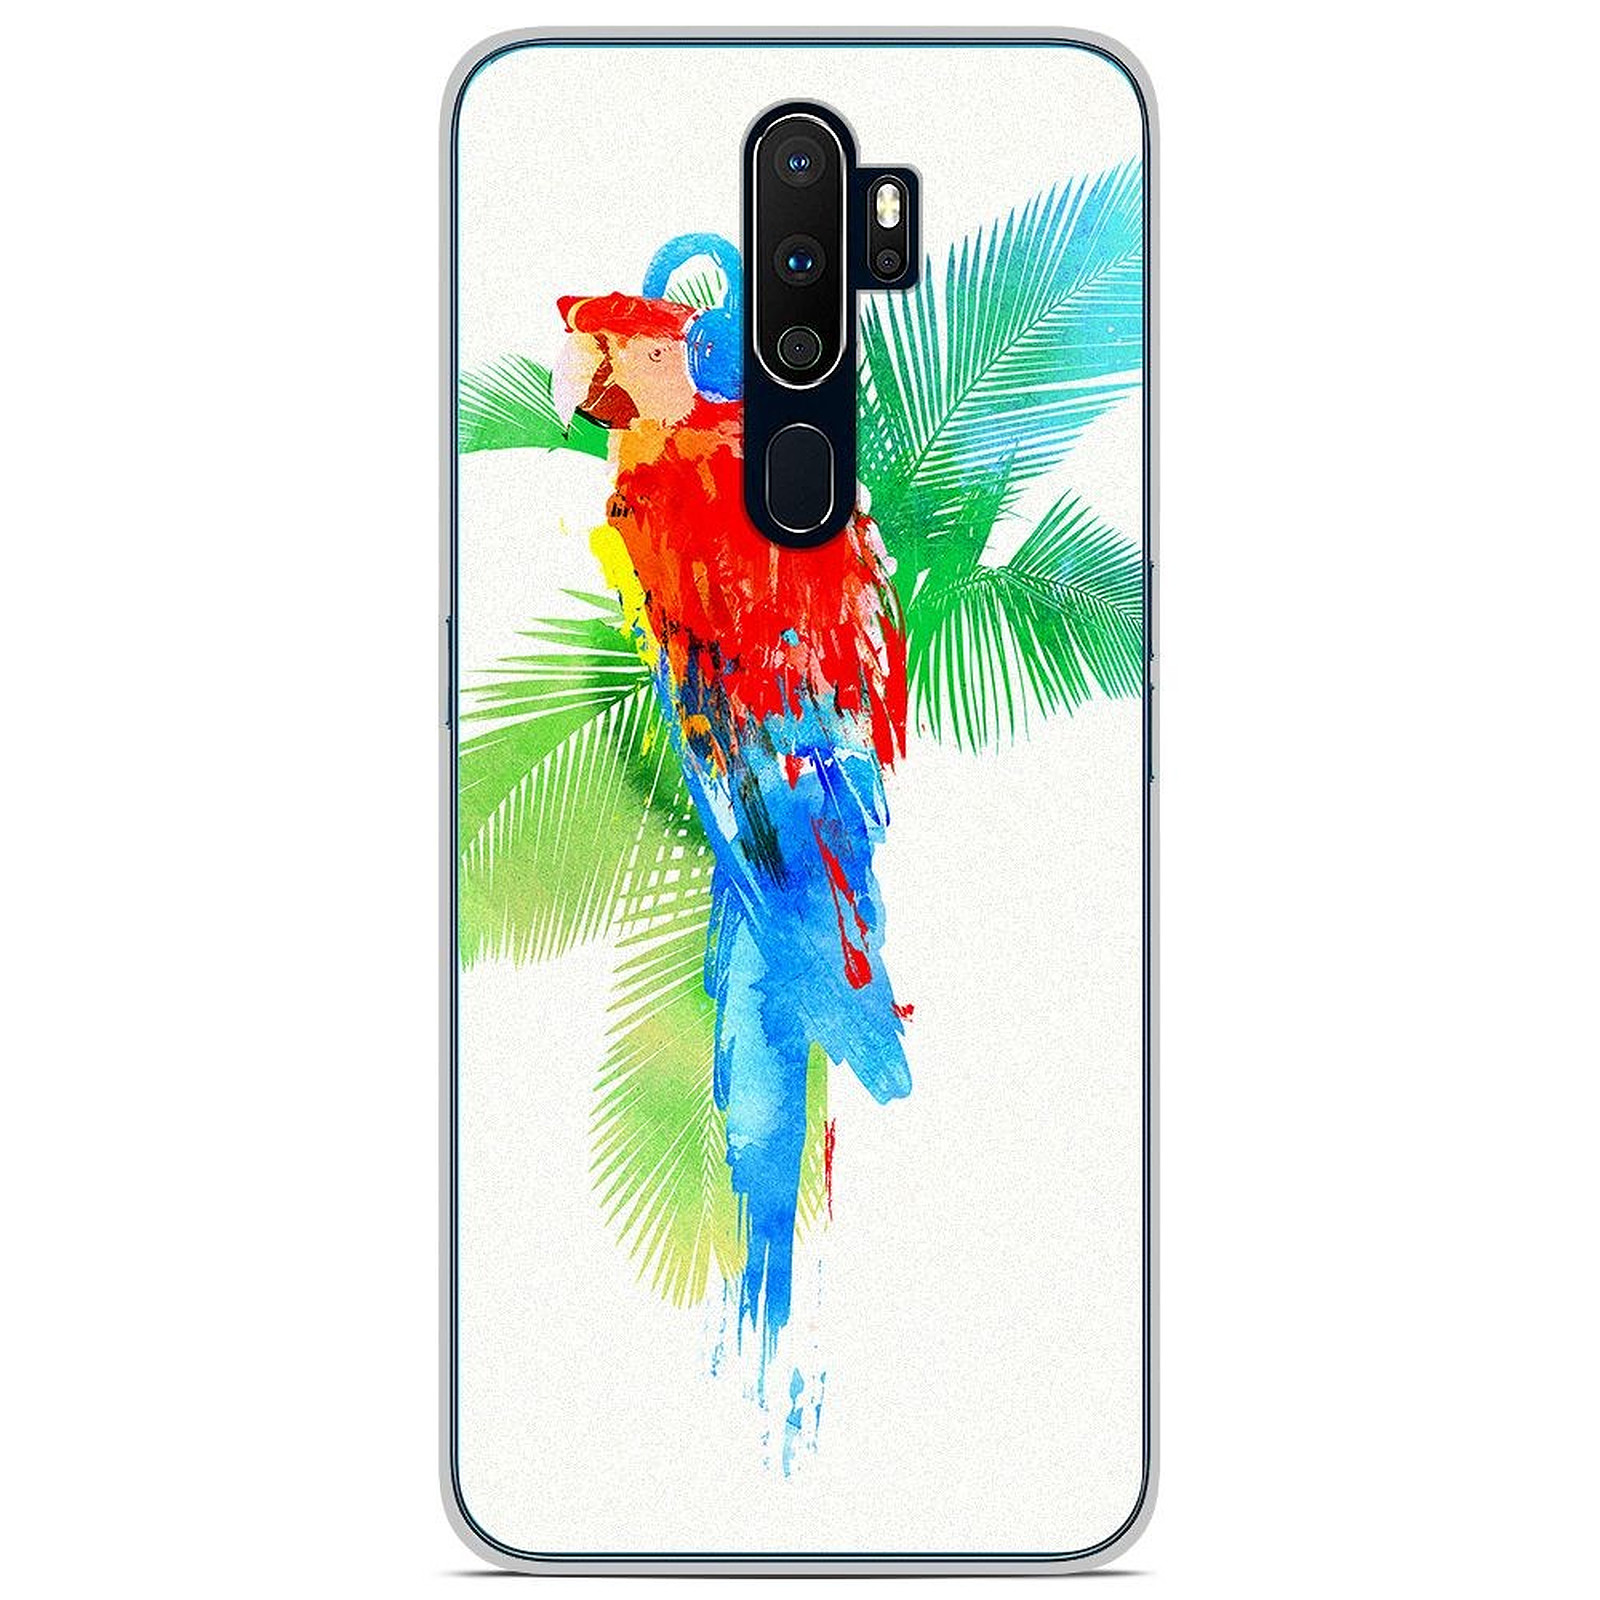 1001 Coques Coque silicone gel Oppo A9 2020 motif RF Tropical party - Coque telephone 1001Coques